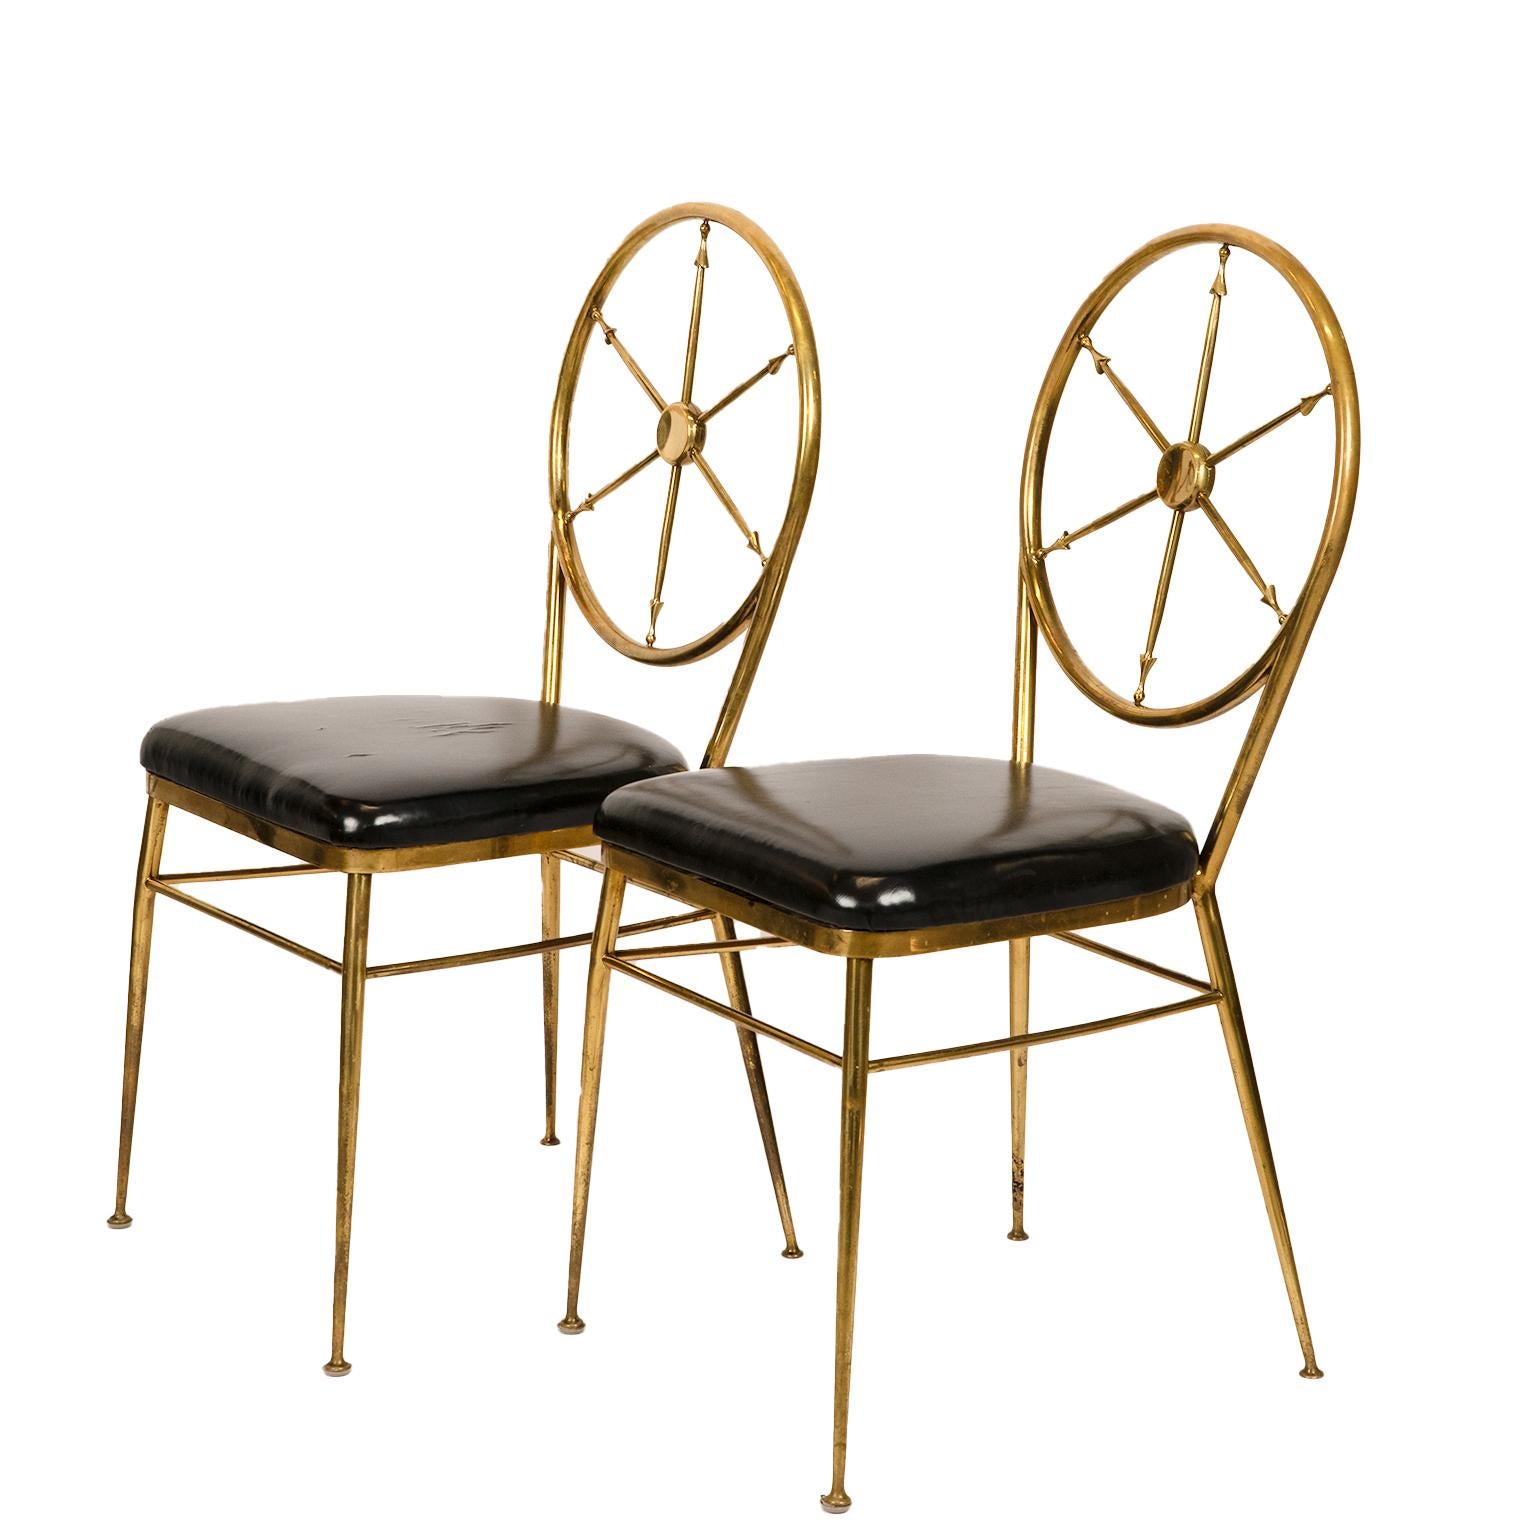 This splendid pair of brass side chairs with
captains or ships wheel backs in original black vinyl fabric ( condition noted). 
Easy to reupholster!
Attributed to Italian design icon of the mid century Gio Ponti.
I bough them from the grandson of the